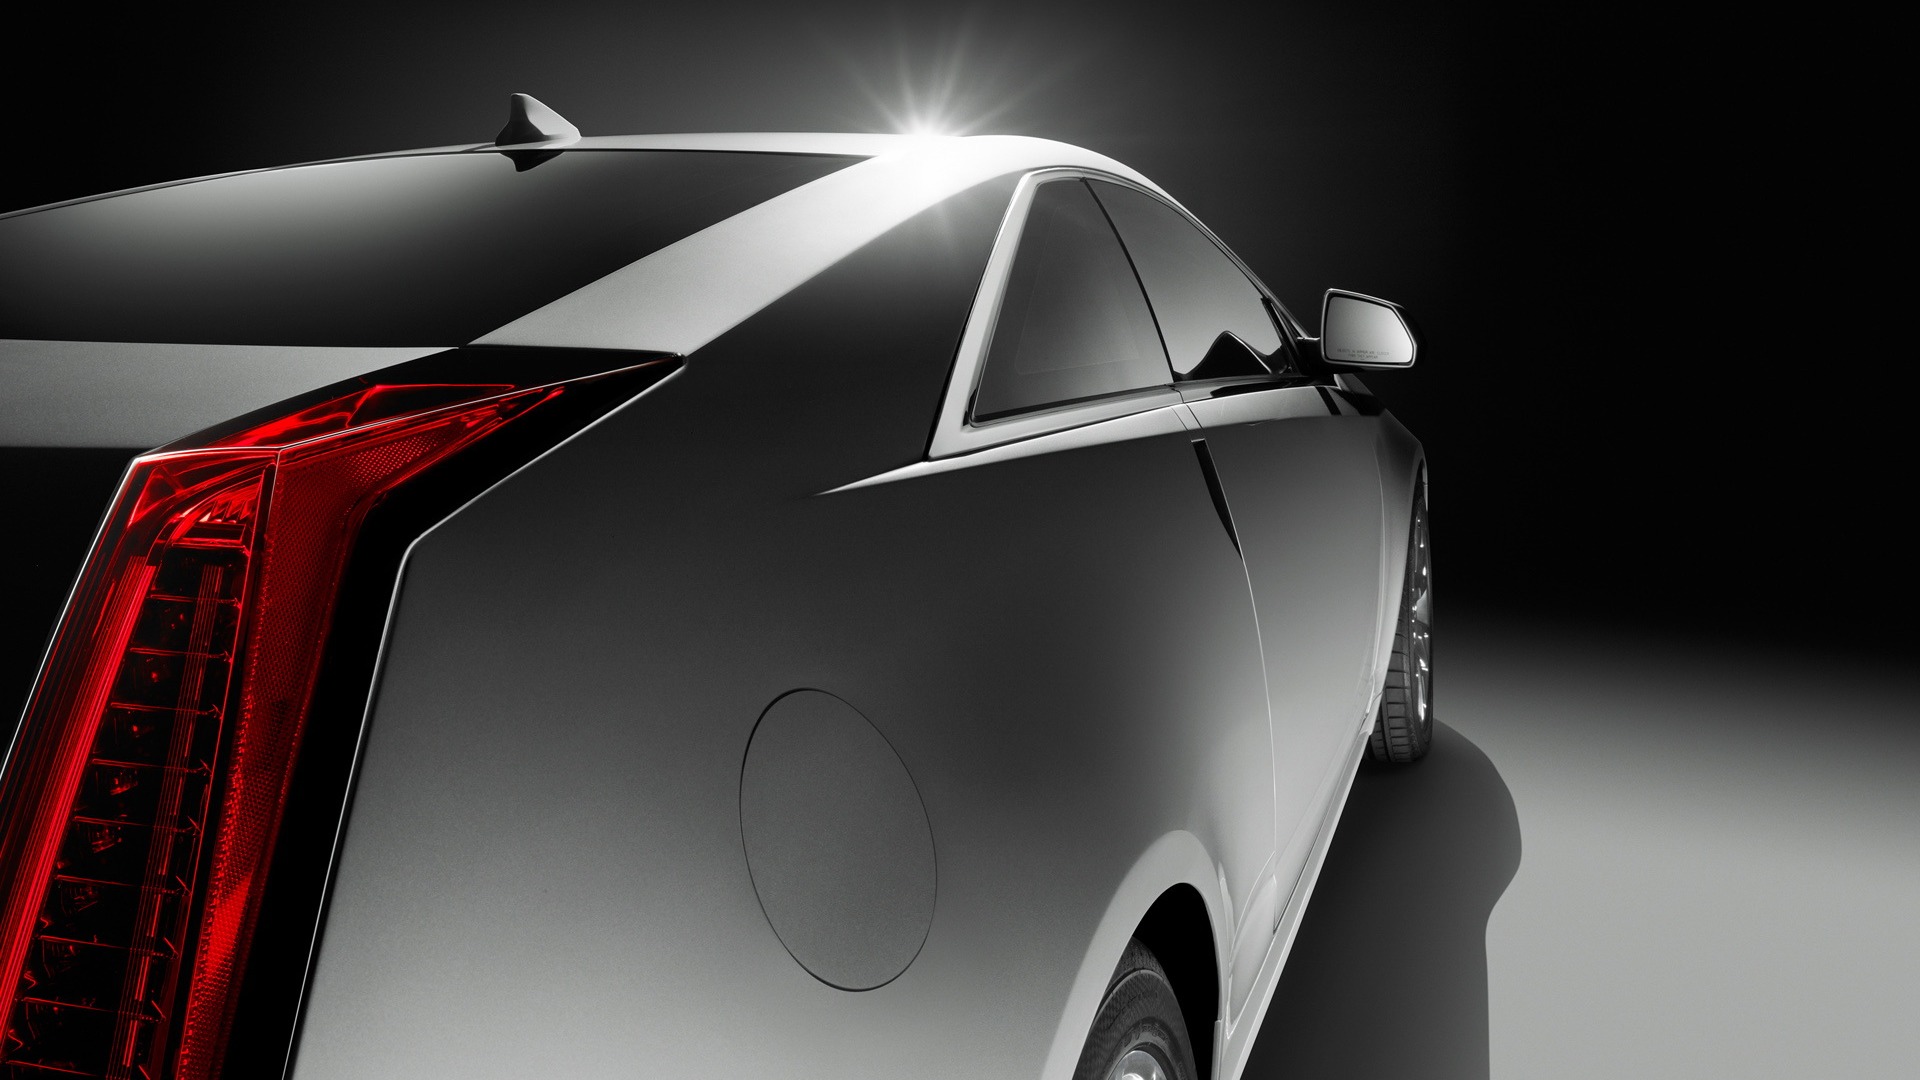 Cadillac CTS Coupe - 2011 凯迪拉克8 - 1920x1080